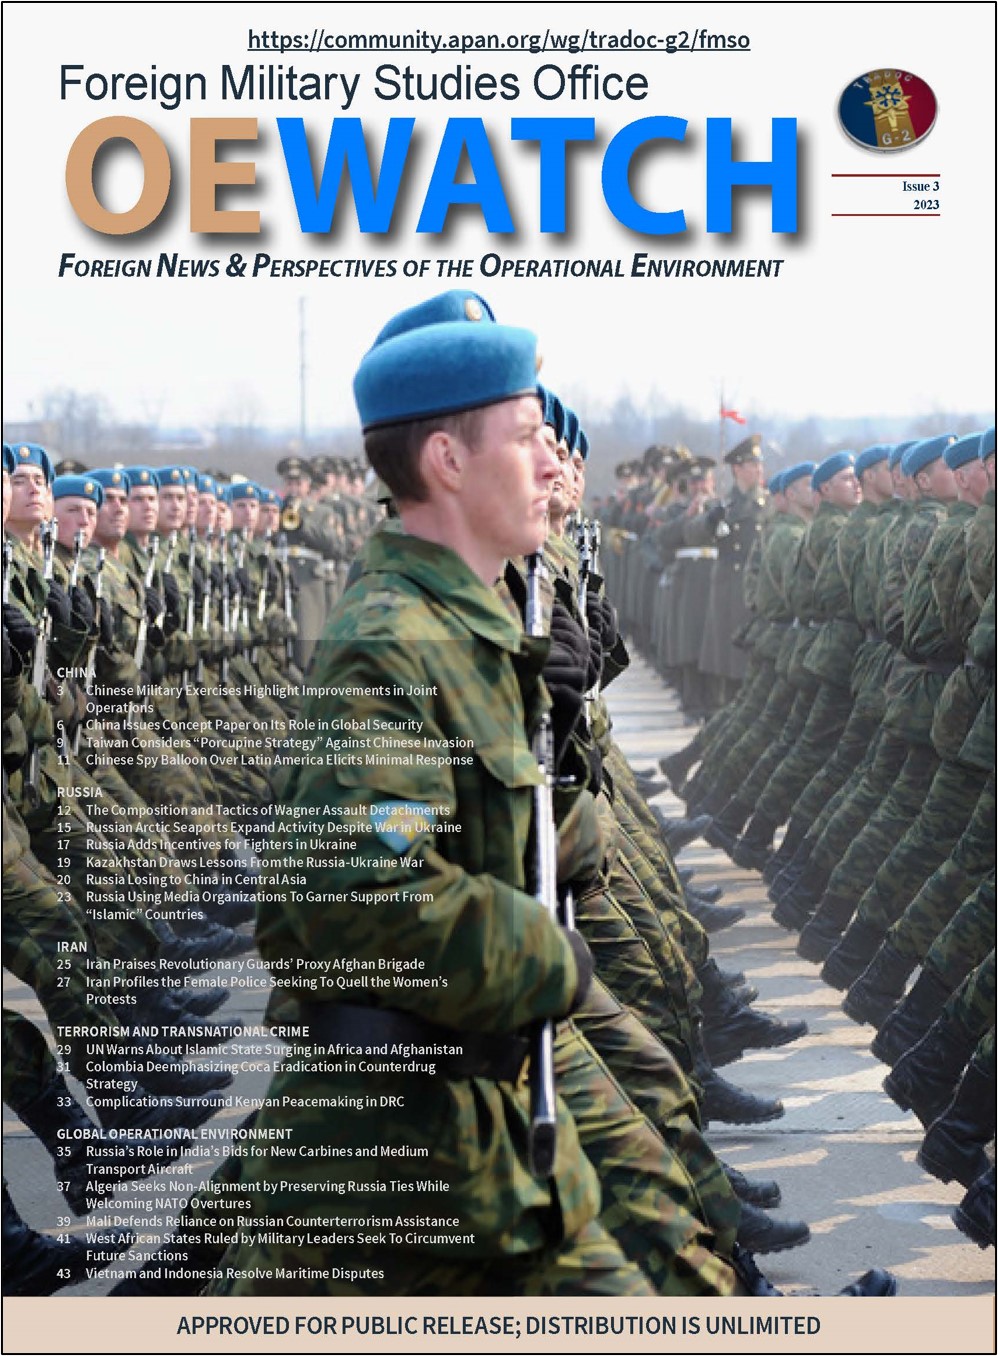 You are currently viewing OE Watch, Vol. 13 (Iss. 03)